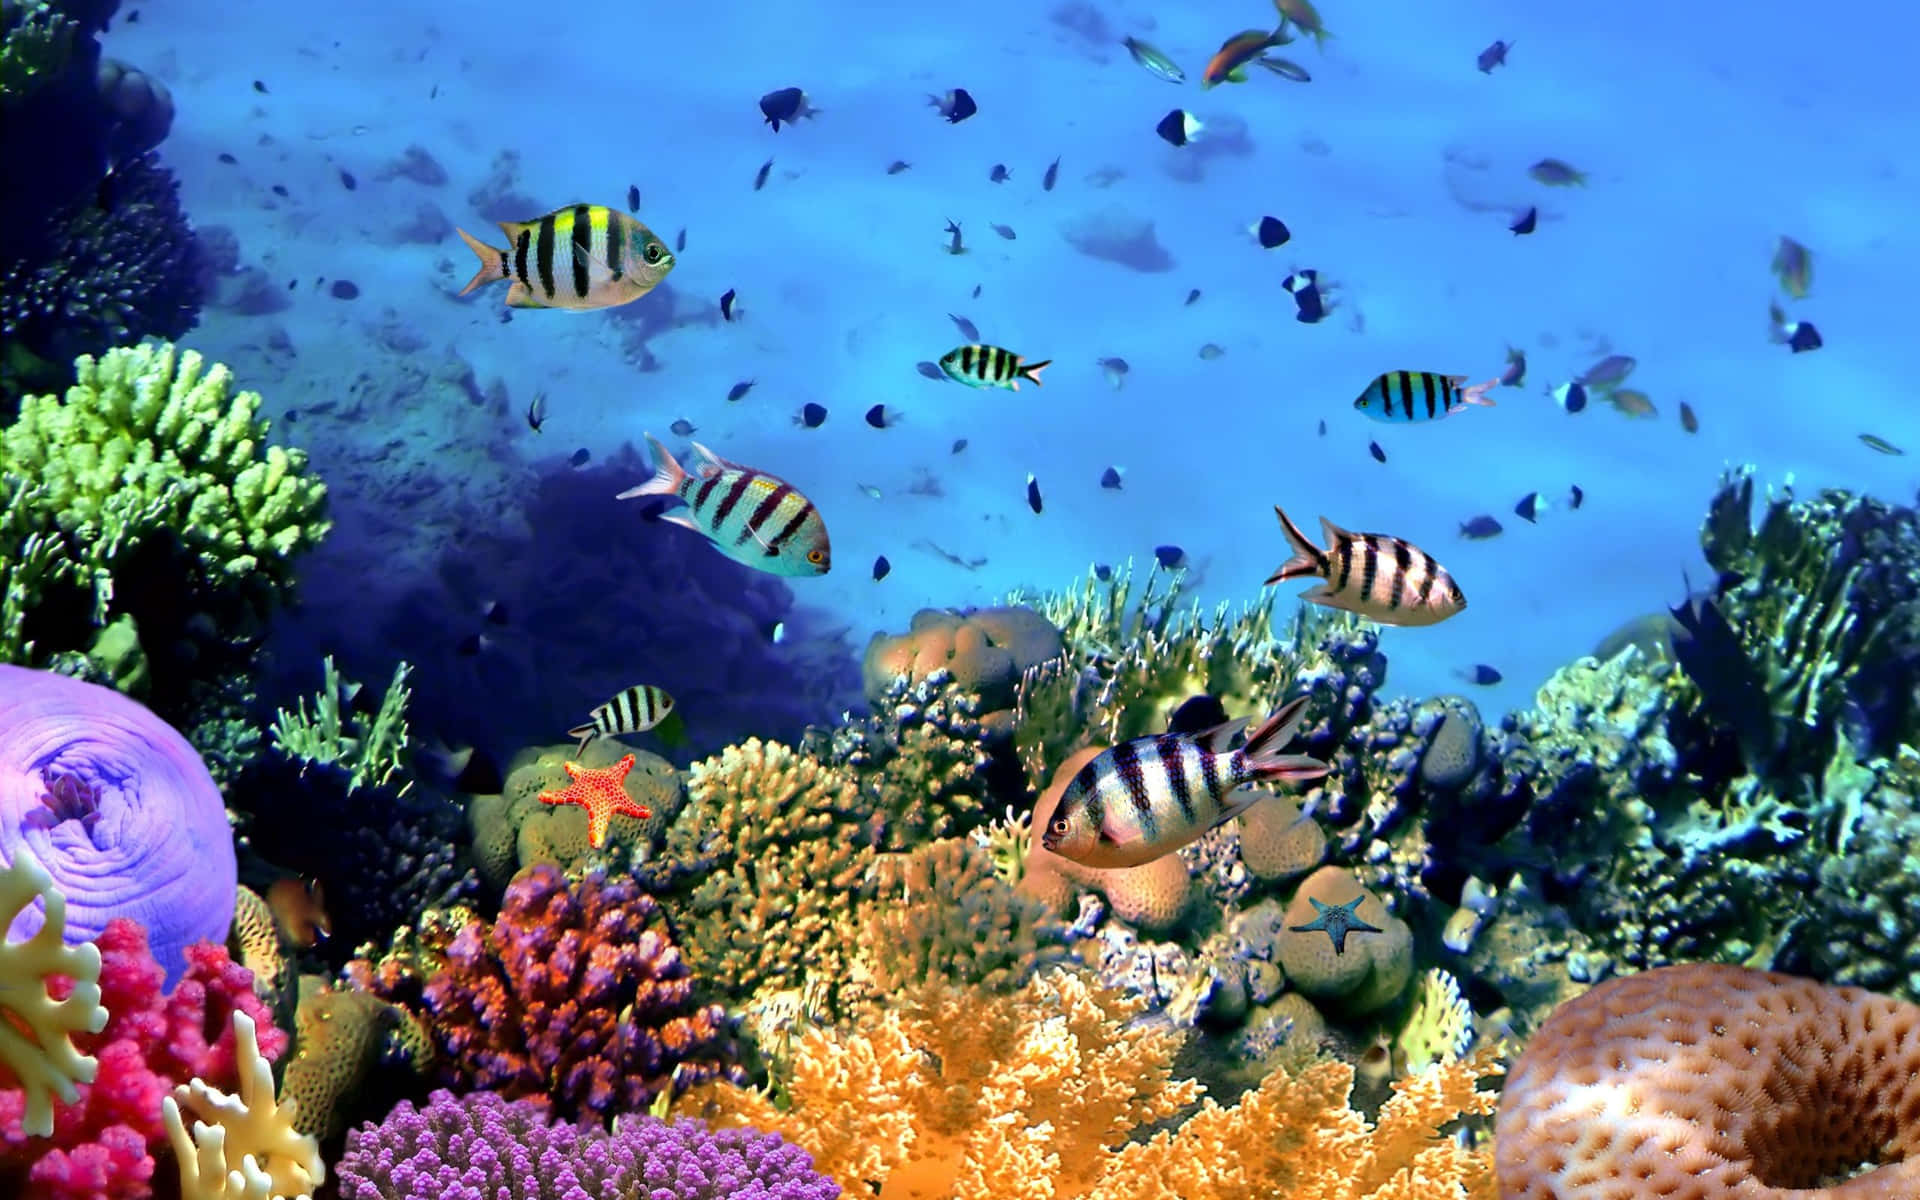 A Colorful Coral Reef With Many Fish And Corals